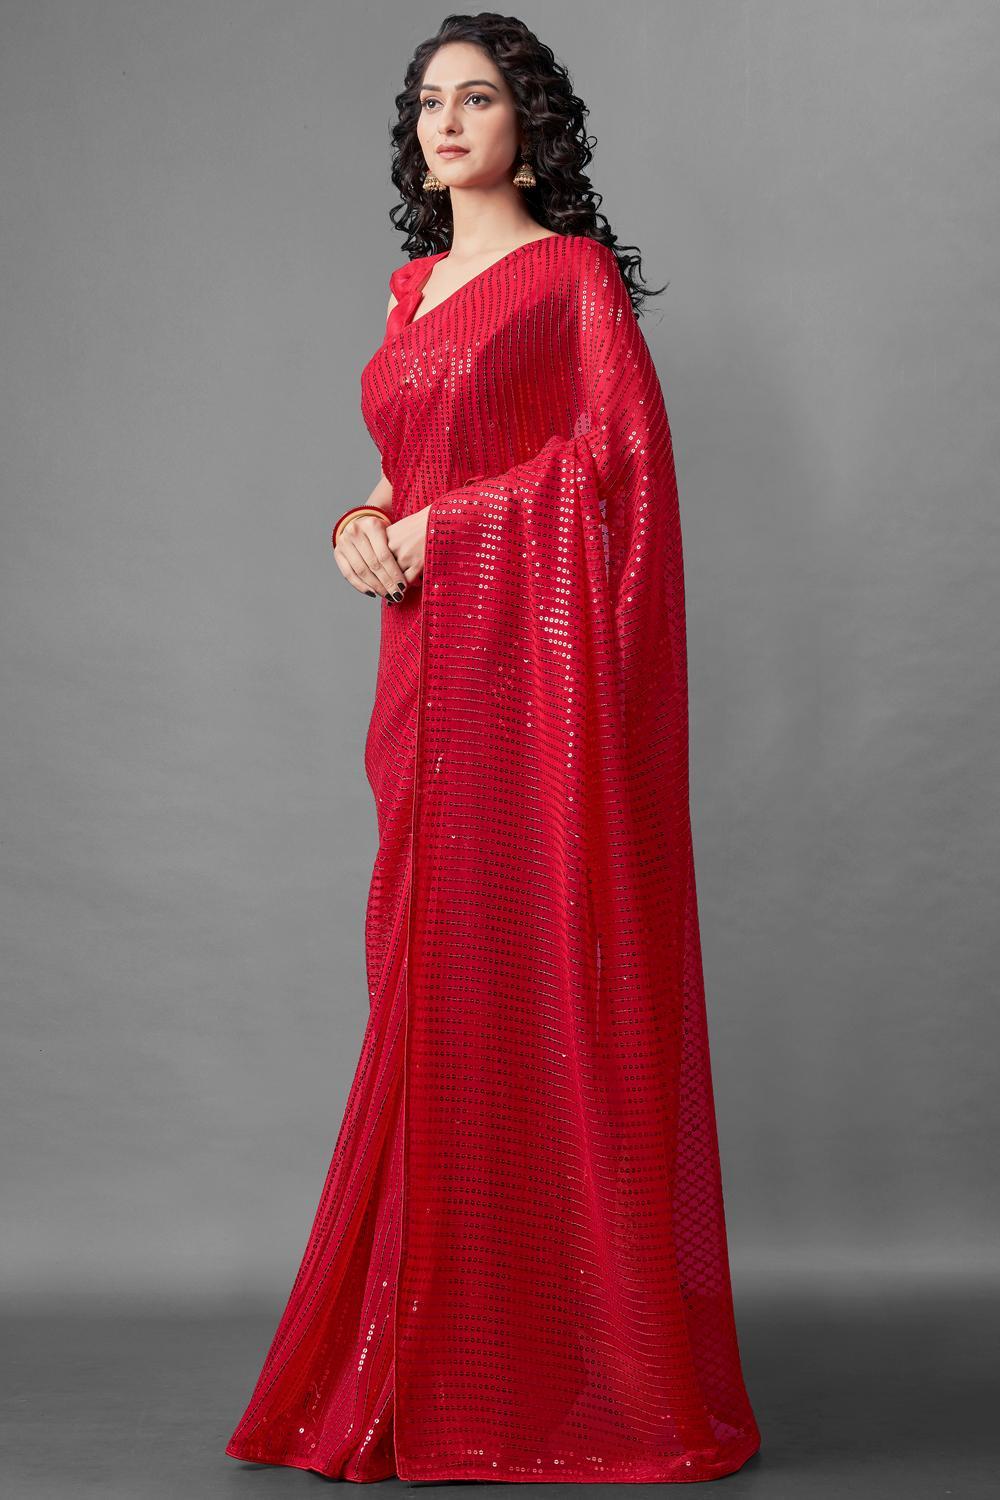 Buy Latest Sari Collection Online in India